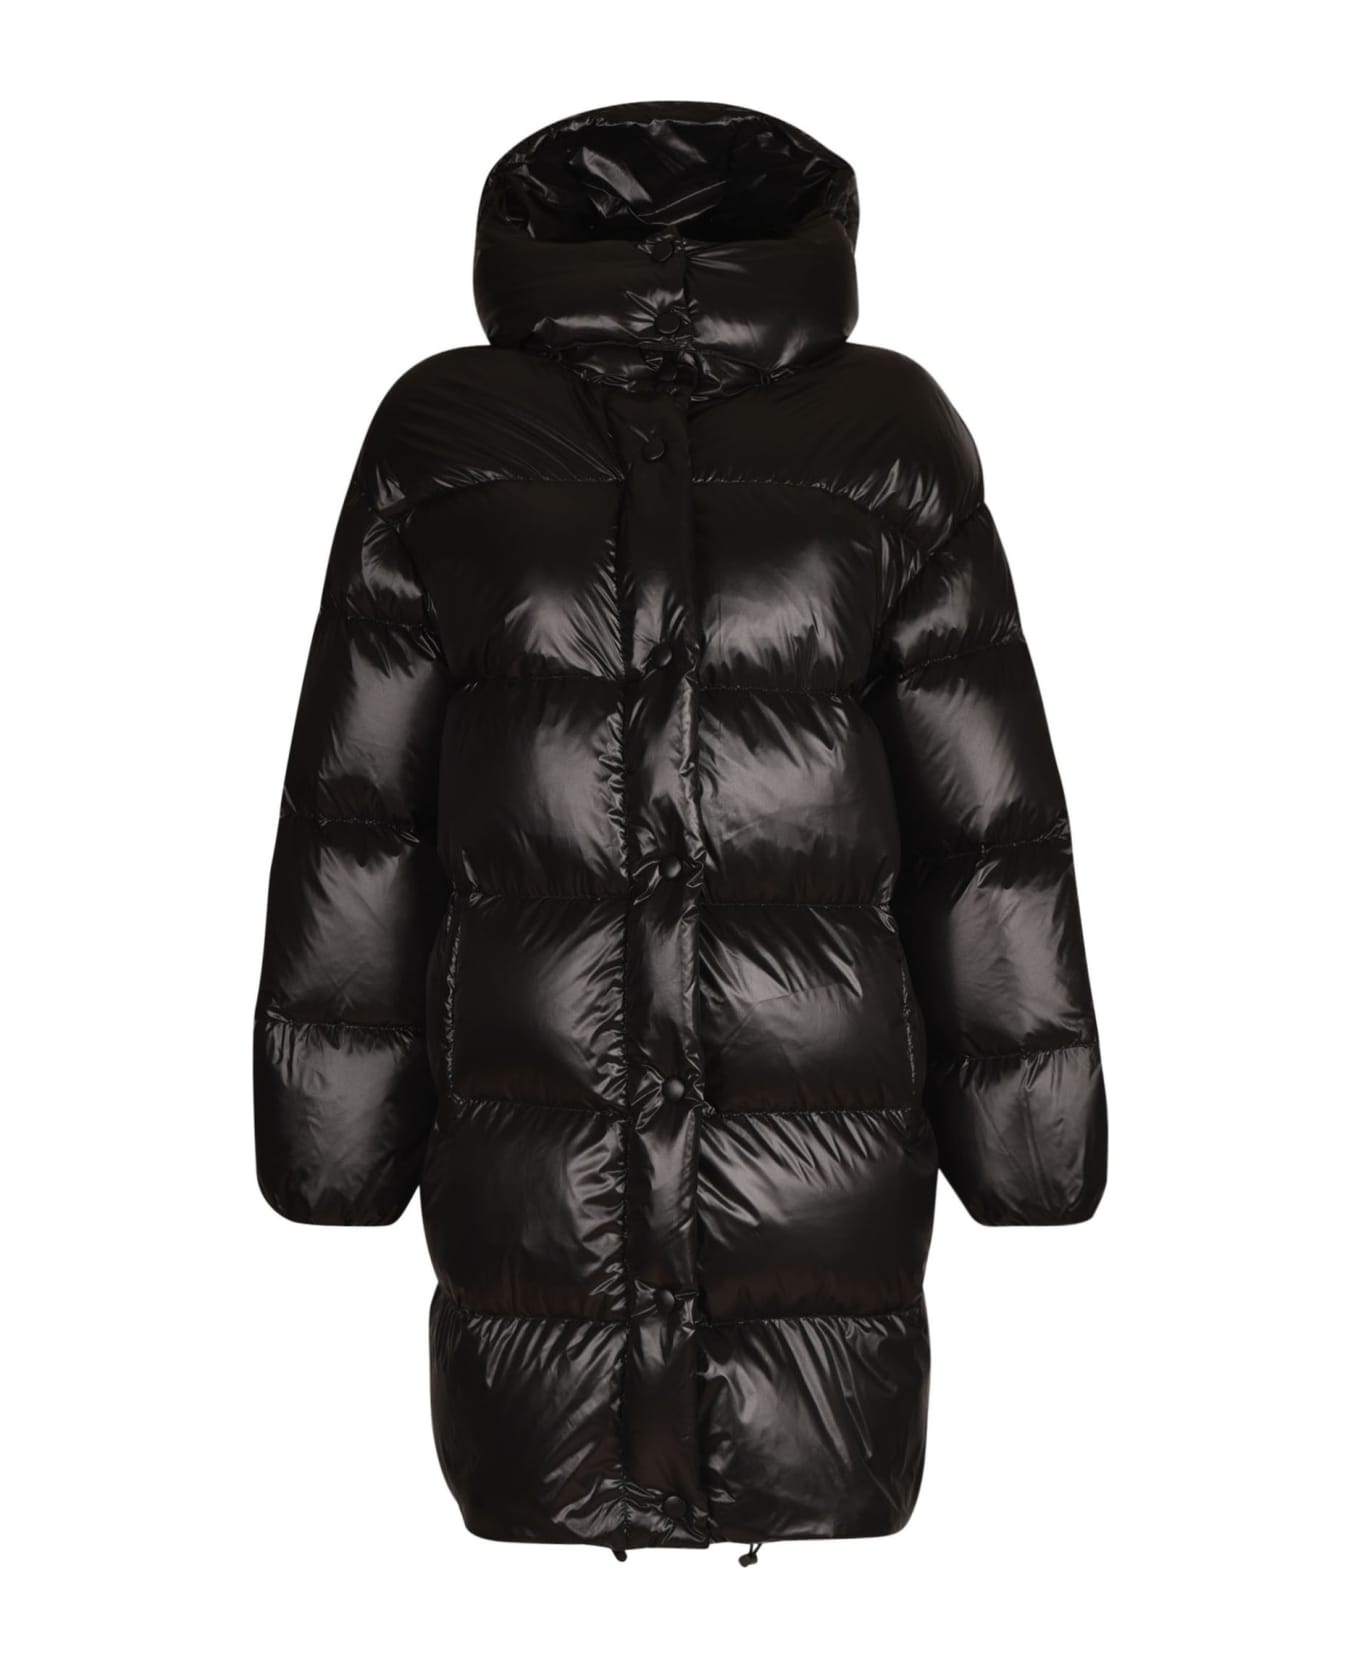 Miu Miu Concealed Buttoned Padded Jacket - Black コート